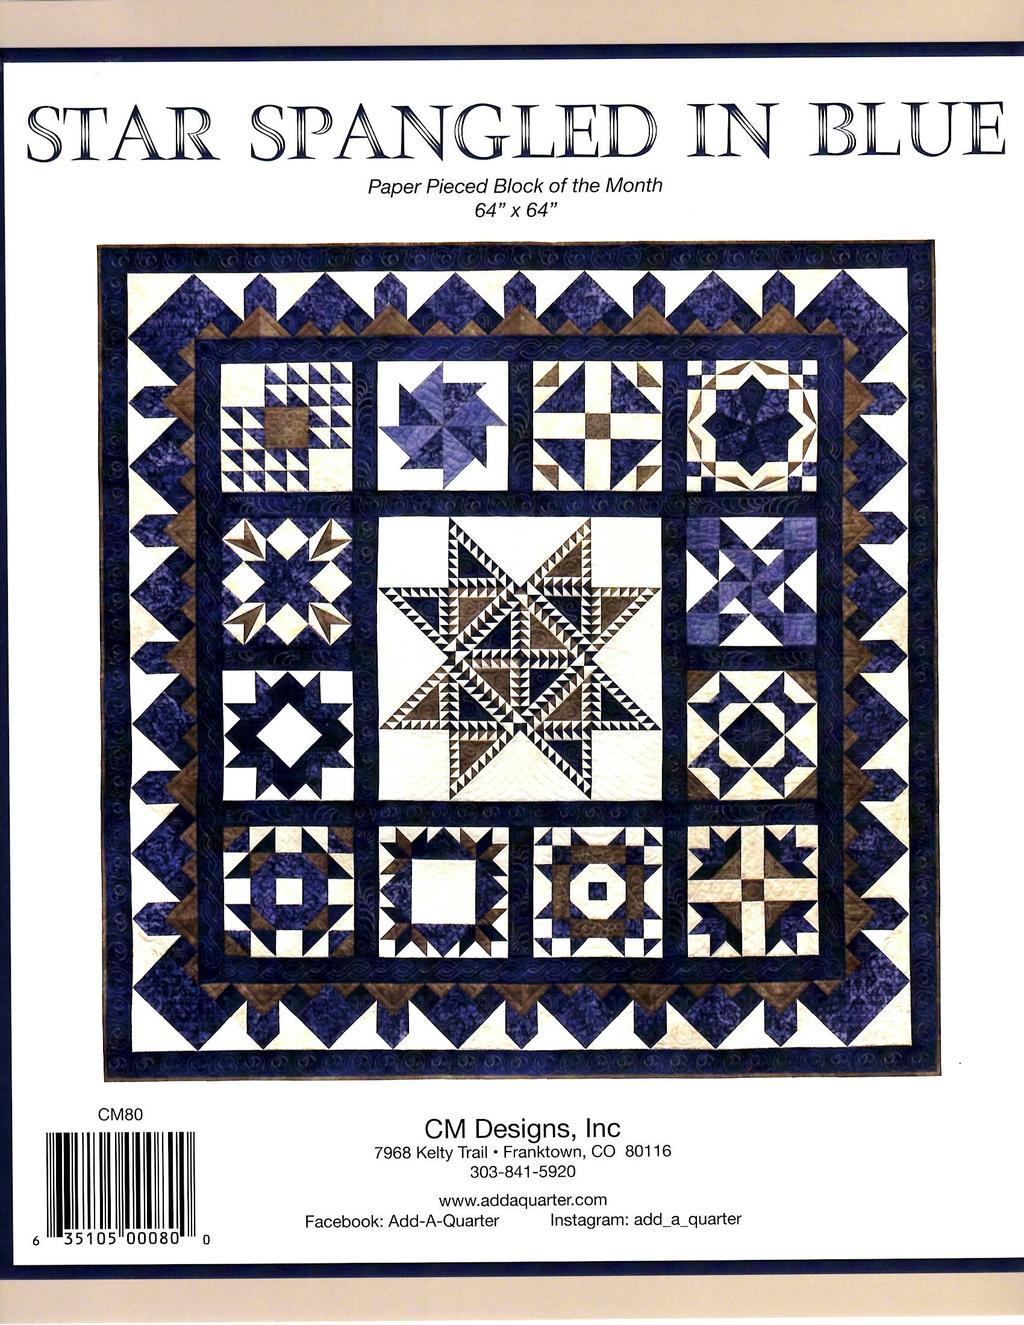 Star Spangled in Blue by CM Designs Paper Pieced Block of the Month 64 x 64 12 Month Program starting in February Do you enjoy paper piecing?